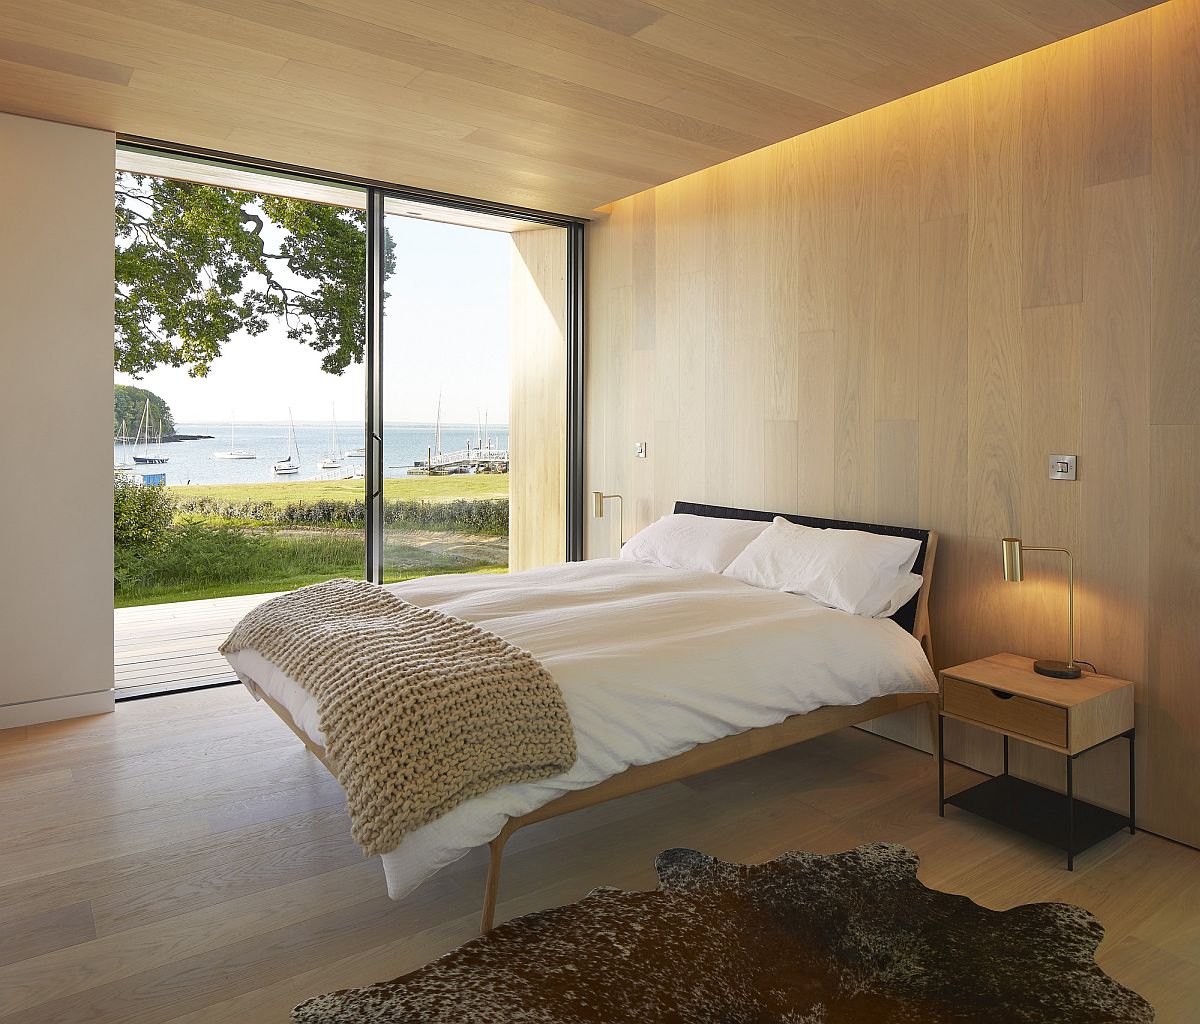 Wooden walls and ceiling along with cozy lighting and wonderful English Channel views for the bedroom